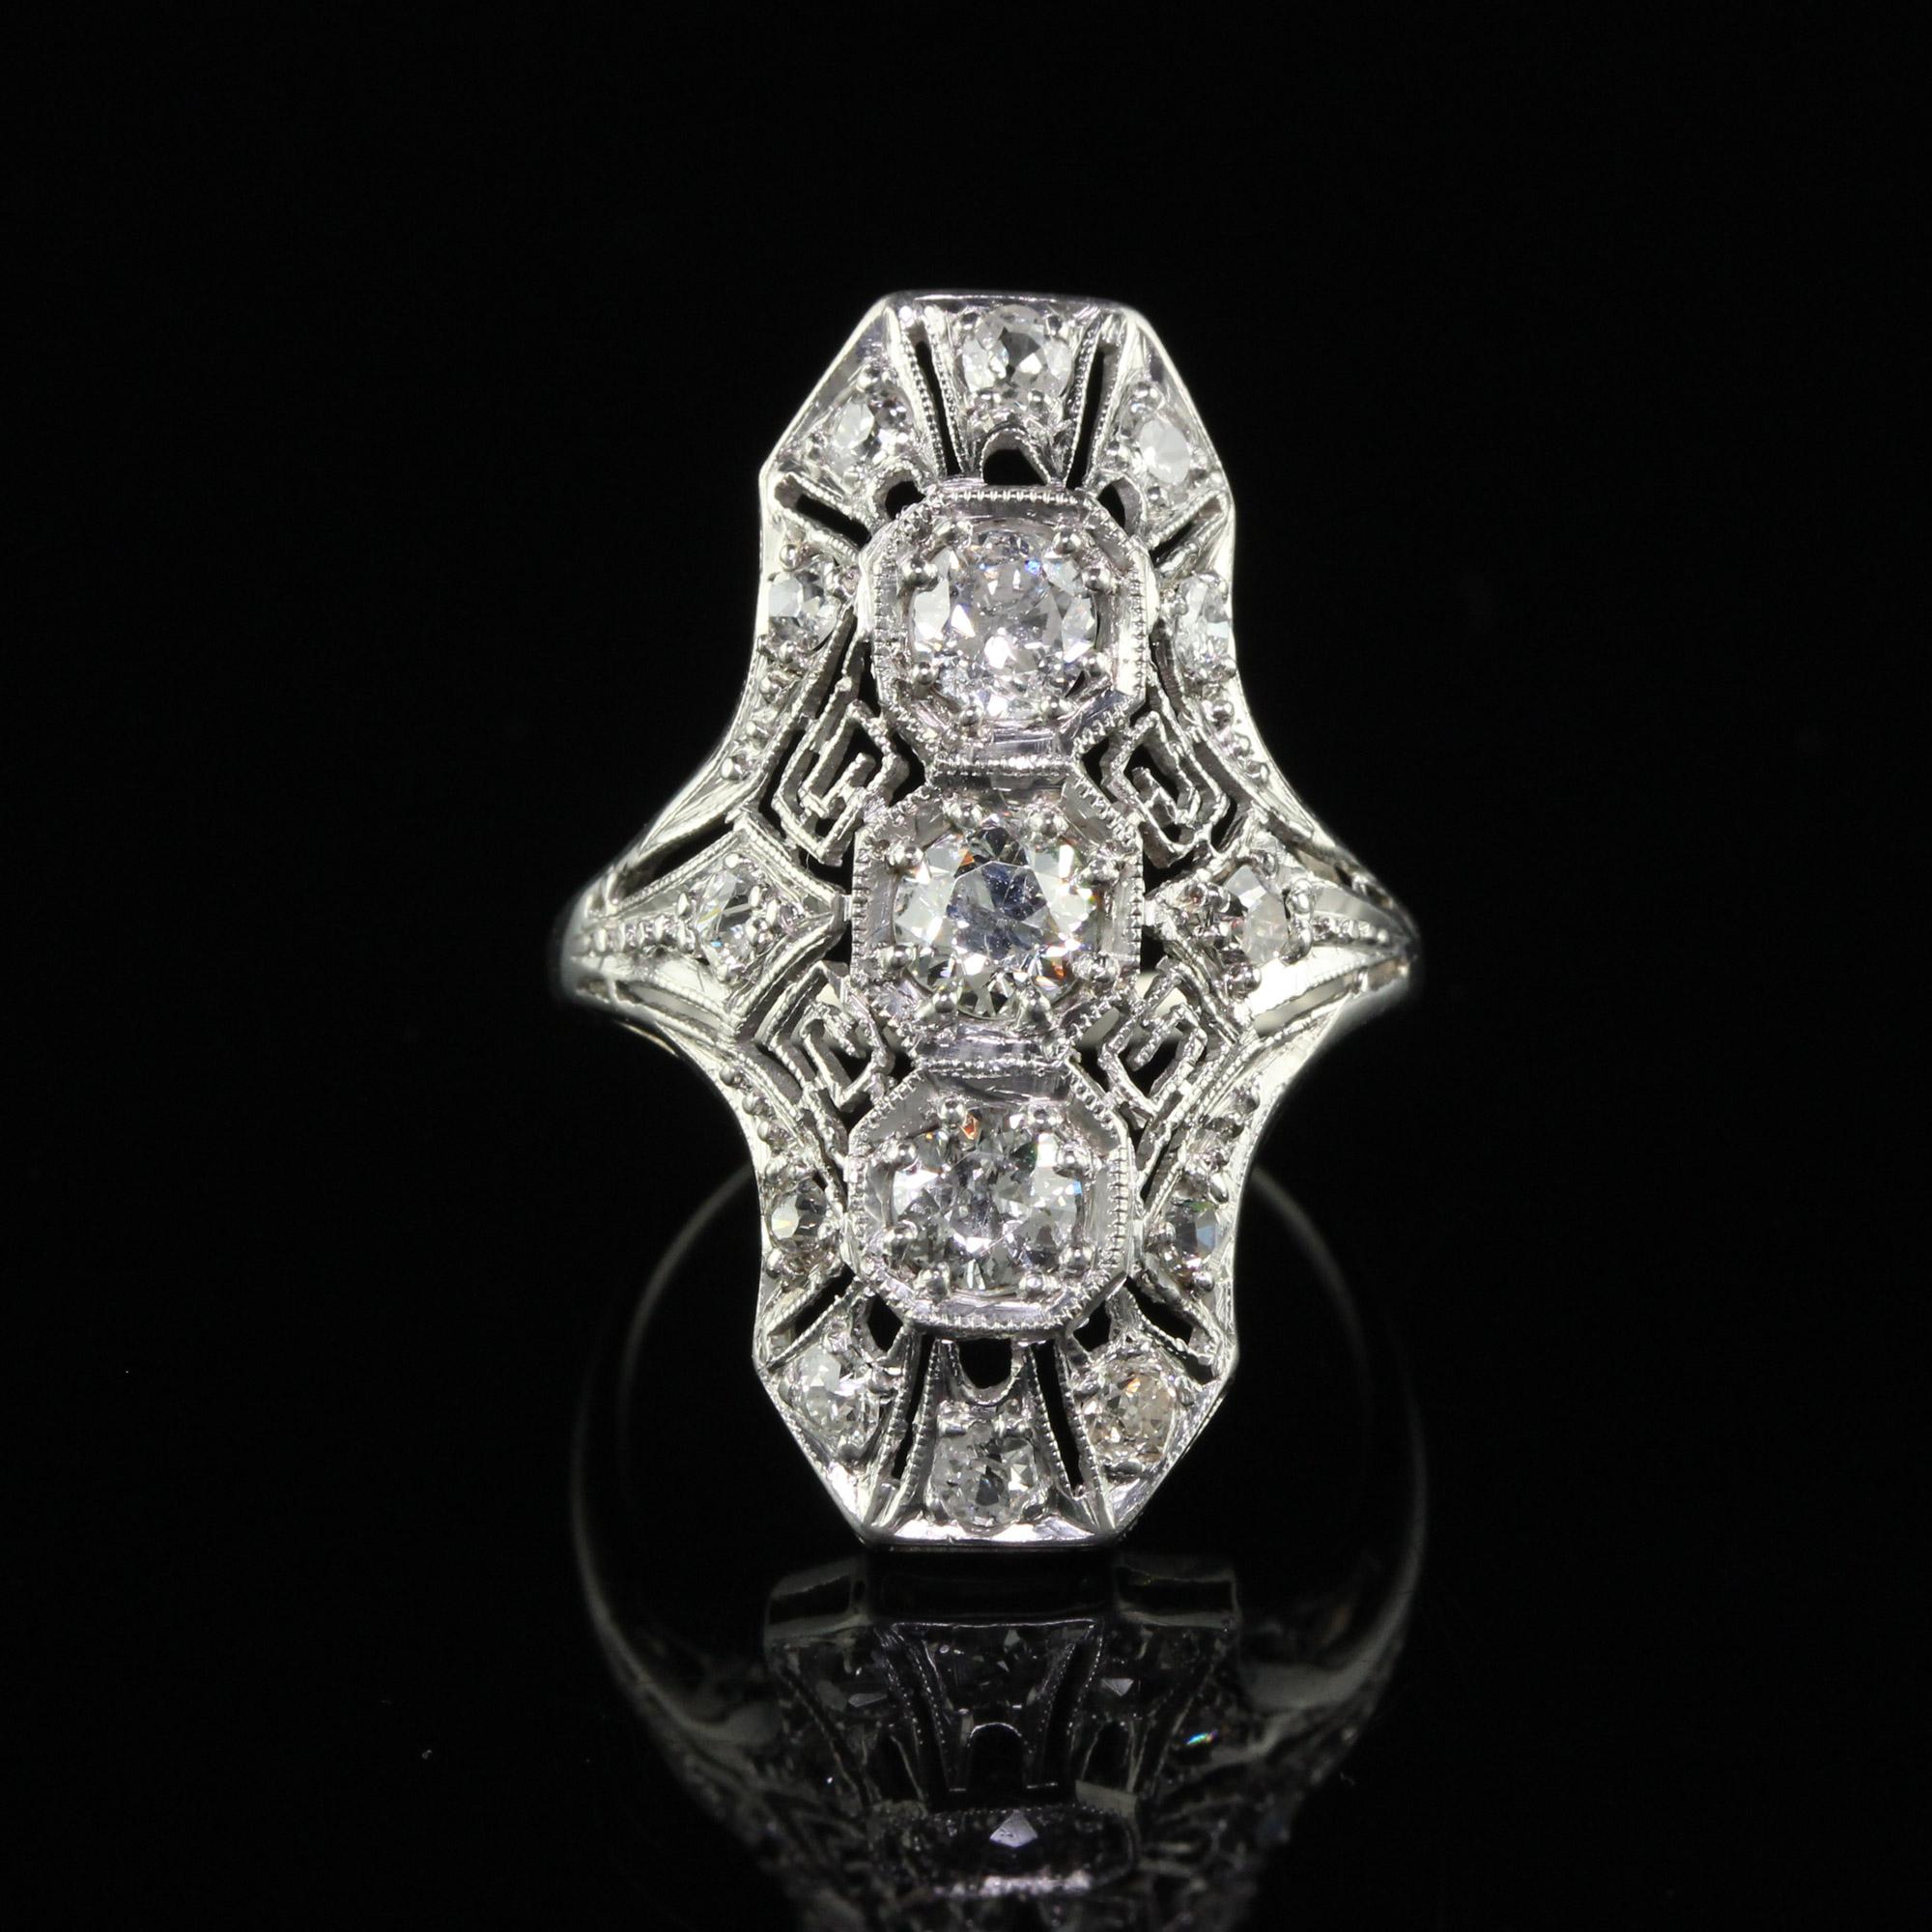 Beautiful Antique Art Deco Platinum Old Euro Diamond and Filigree Shield Ring. This incredible shield ring is crafted in platinum. The center of the ring holds a row of old European cut diamonds and is surrounded by old European cut diamonds set in